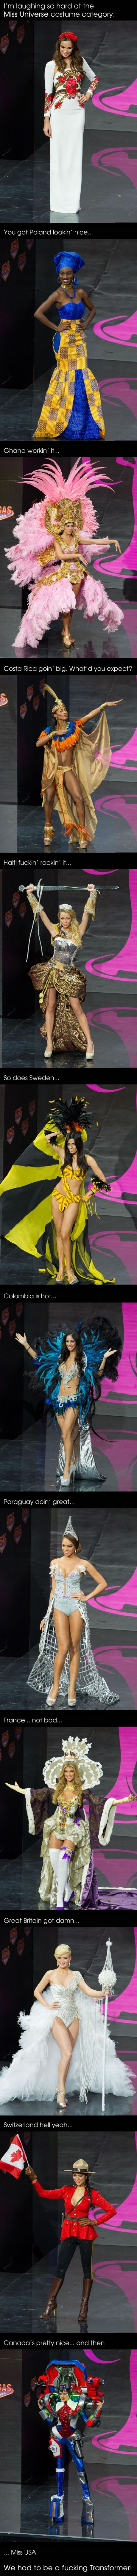 miss-universe-costume-category